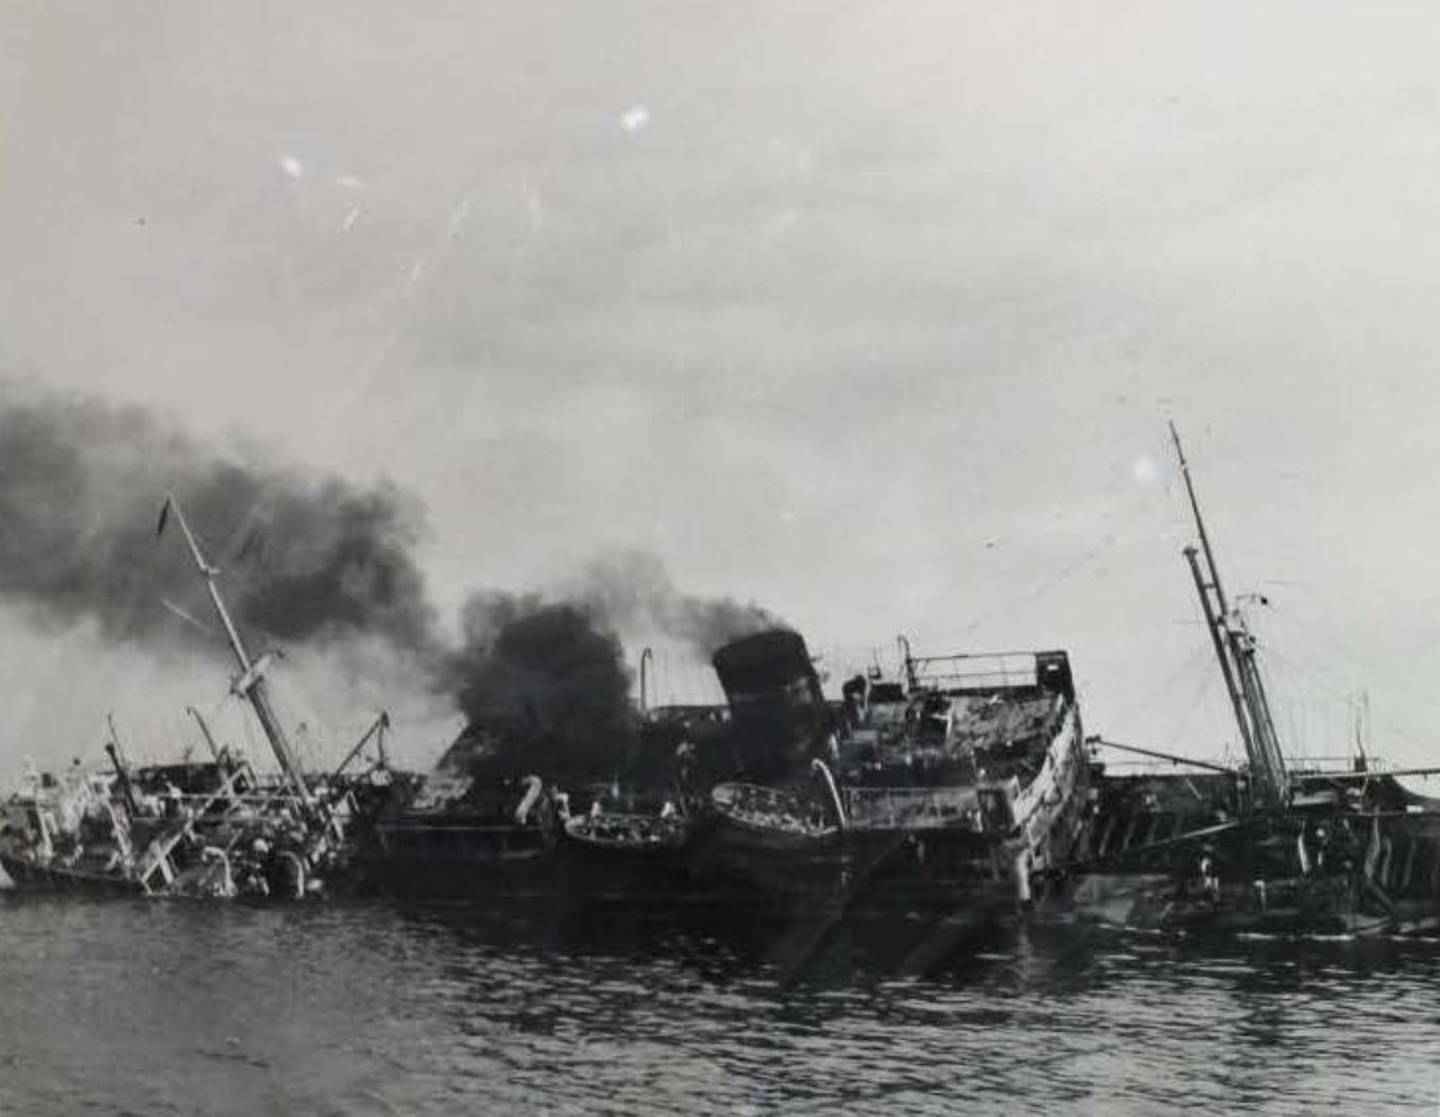 Listing heavily and her deck already partly submerged, the Dara begins to sink while under tow to Dubai, The ship was still burning two days after a bomb caused a fire that killed at least 240 people on April 8, 1961. UK National Archives